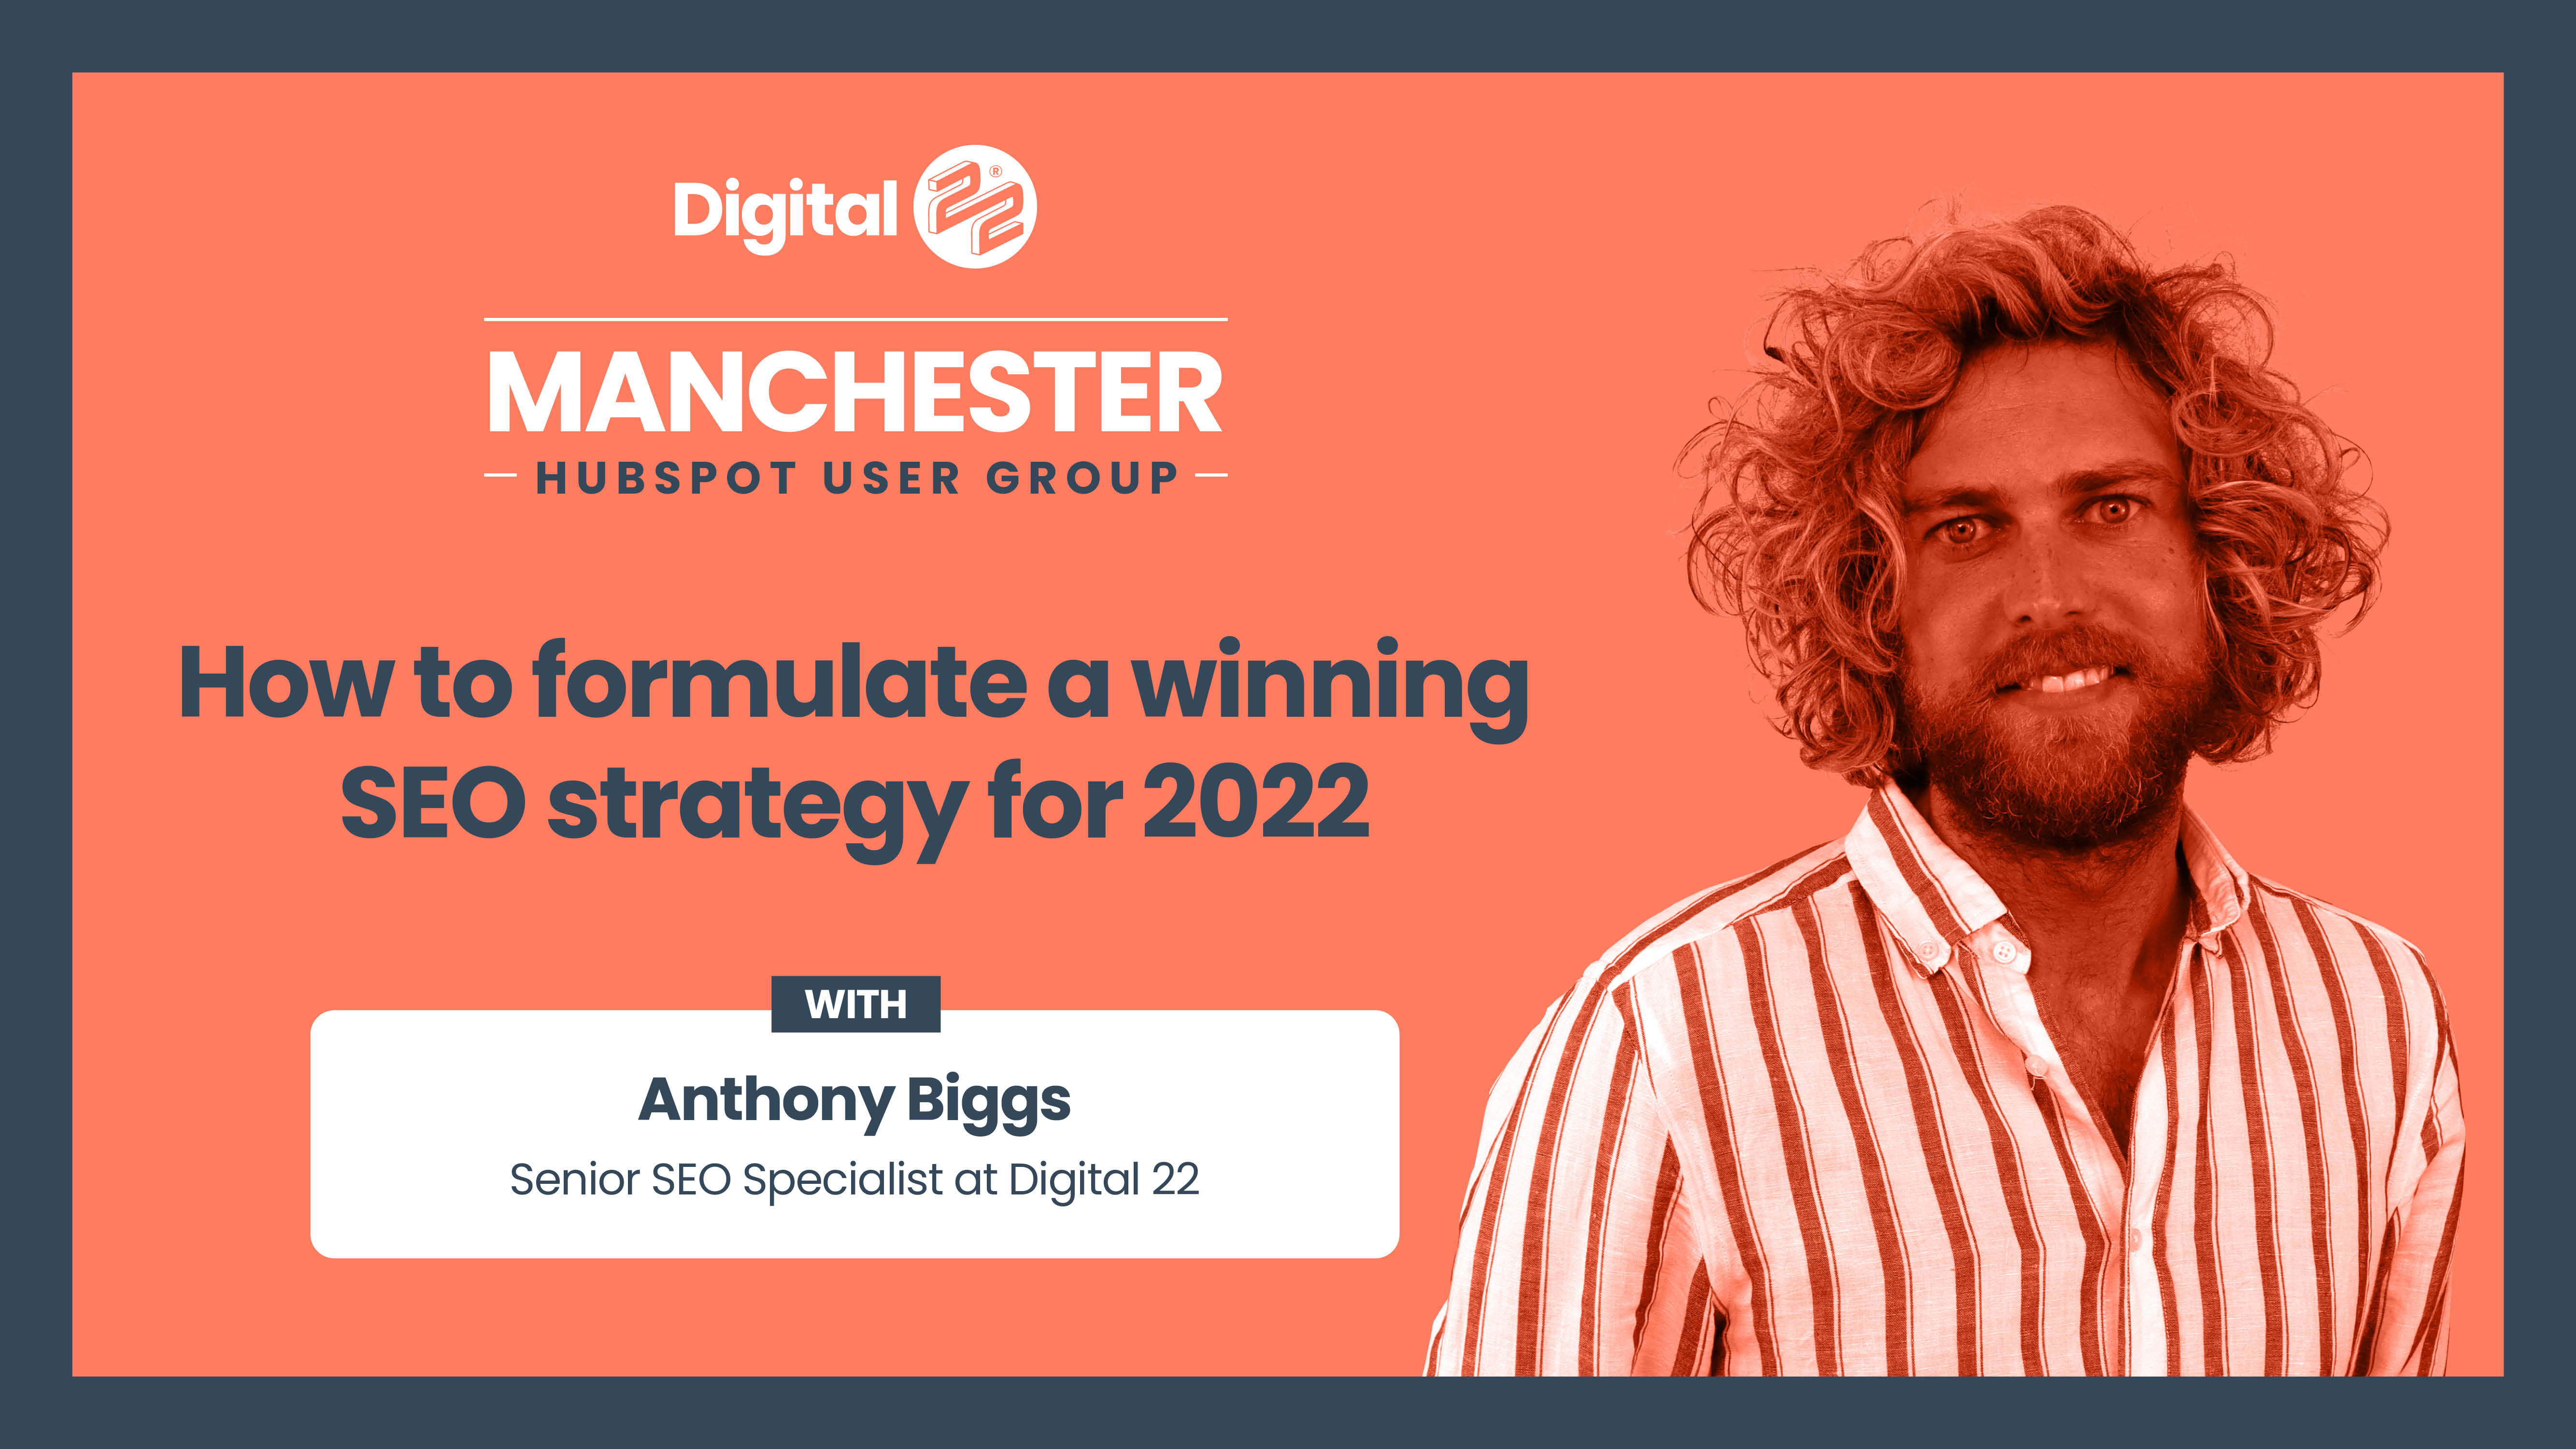 How to formulate a winning SEO strategy for 2022 with Anthony Biggs